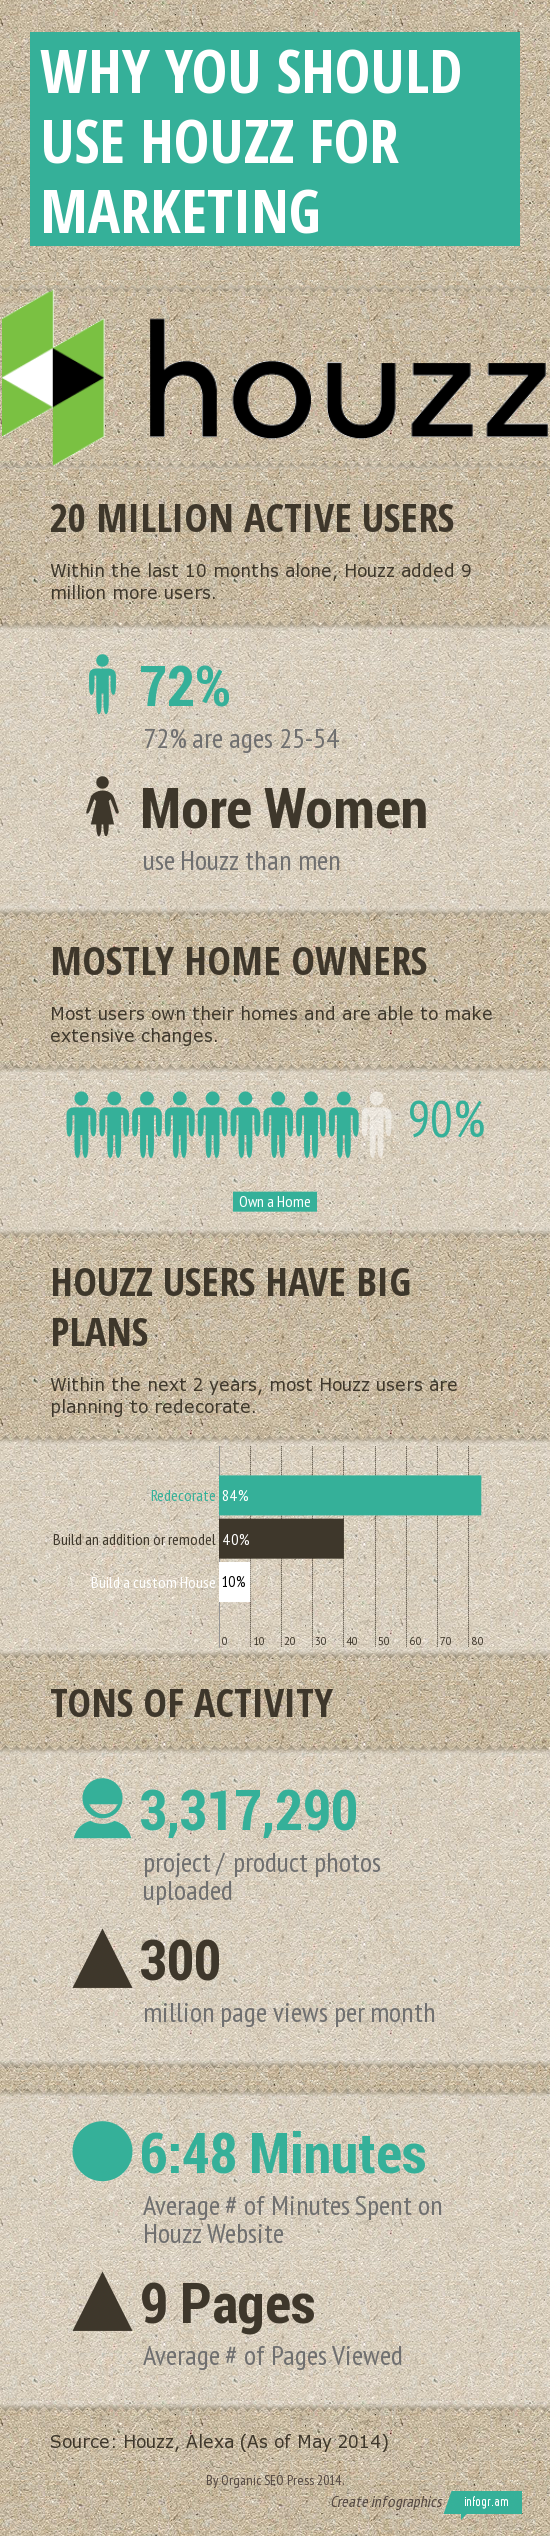 Houzz for Marketing Infographic